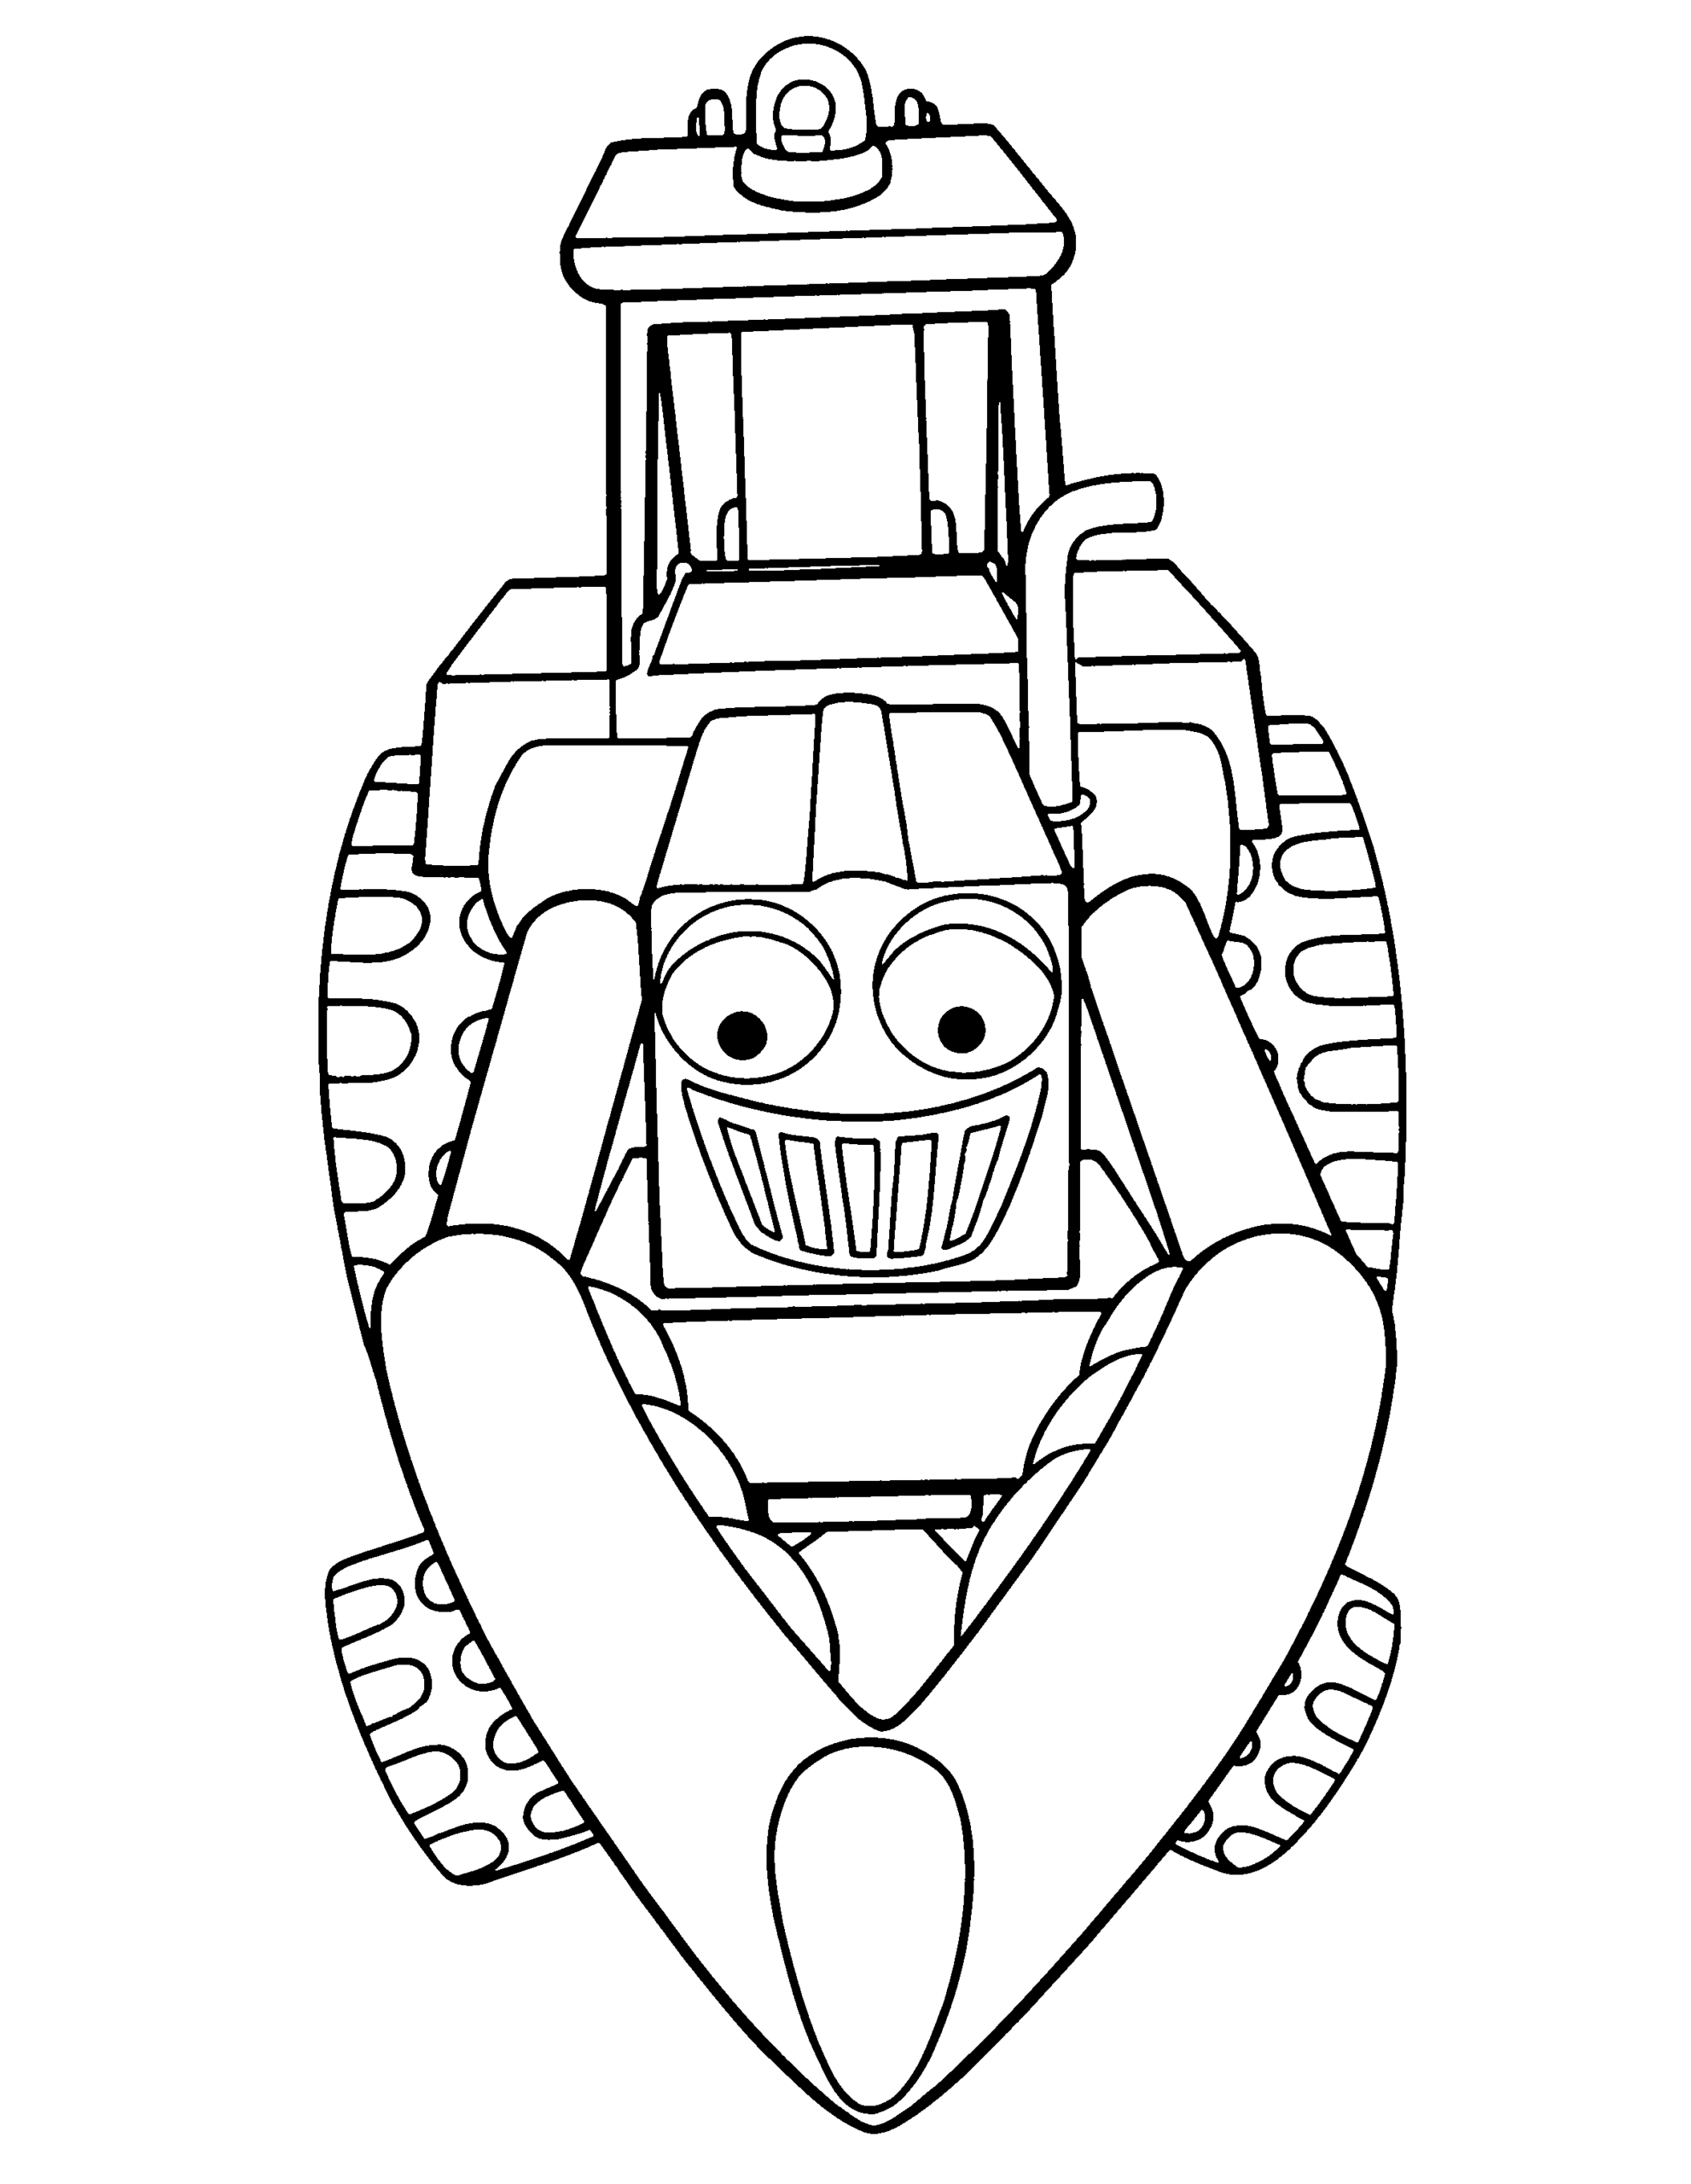 Bob the Builder Coloring Pages TV Film bob the builder 104 Printable 2020 01009 Coloring4free